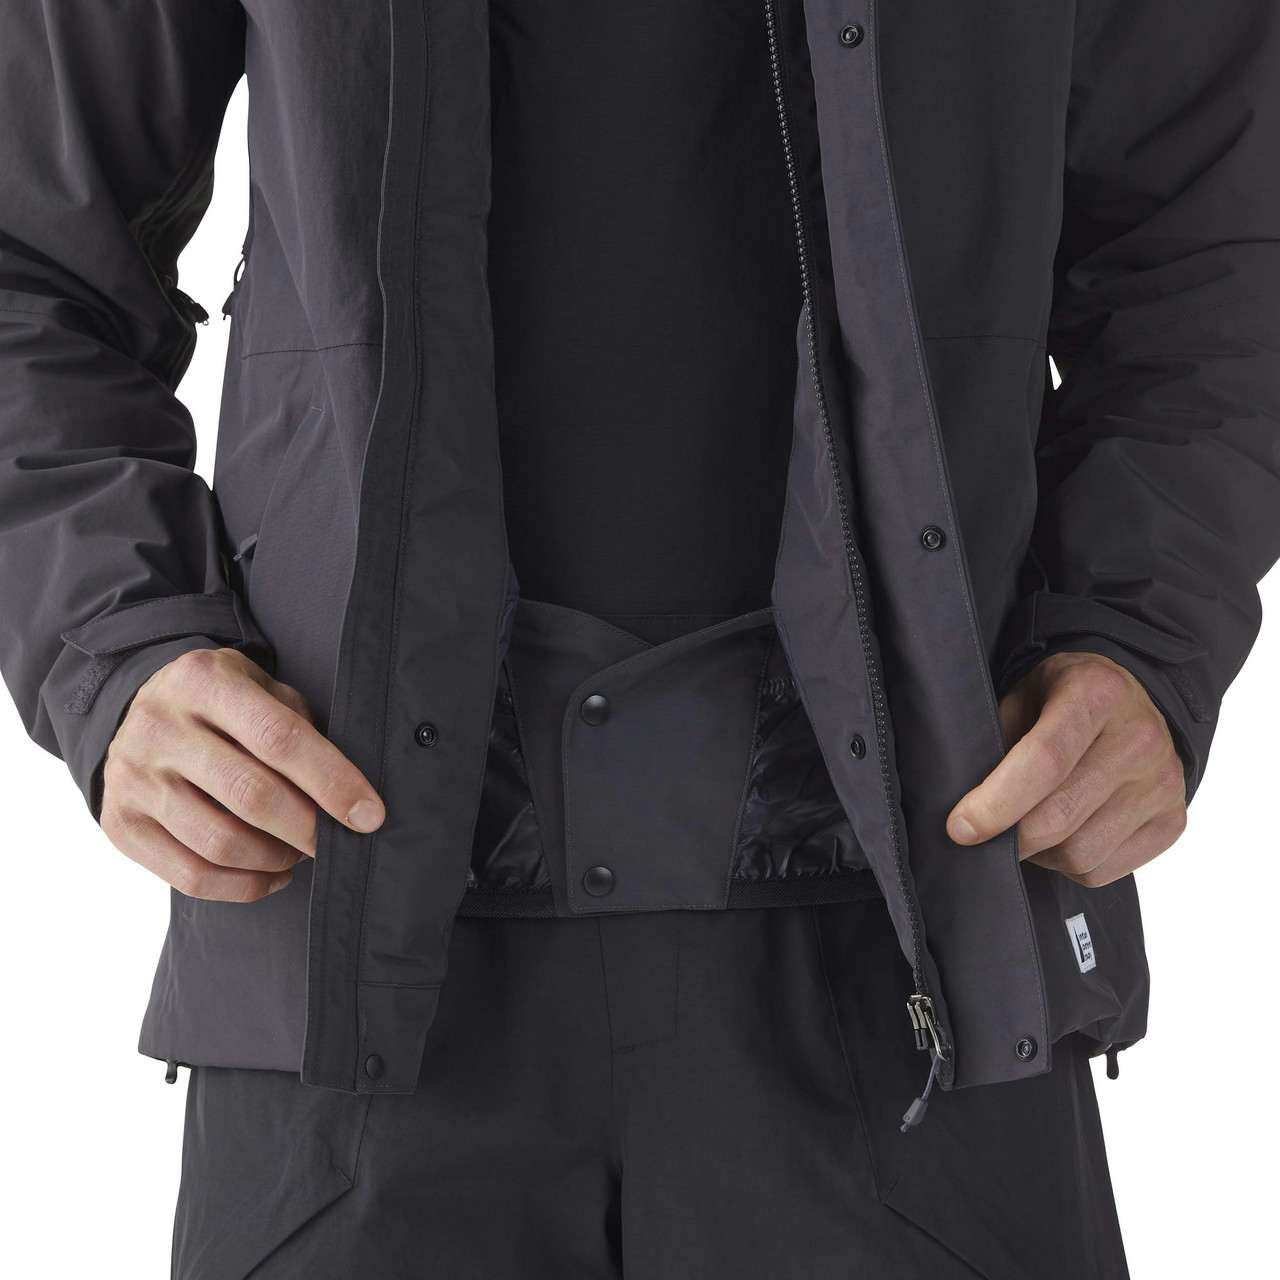 Fall-Line Insulated Jacket Obsidian